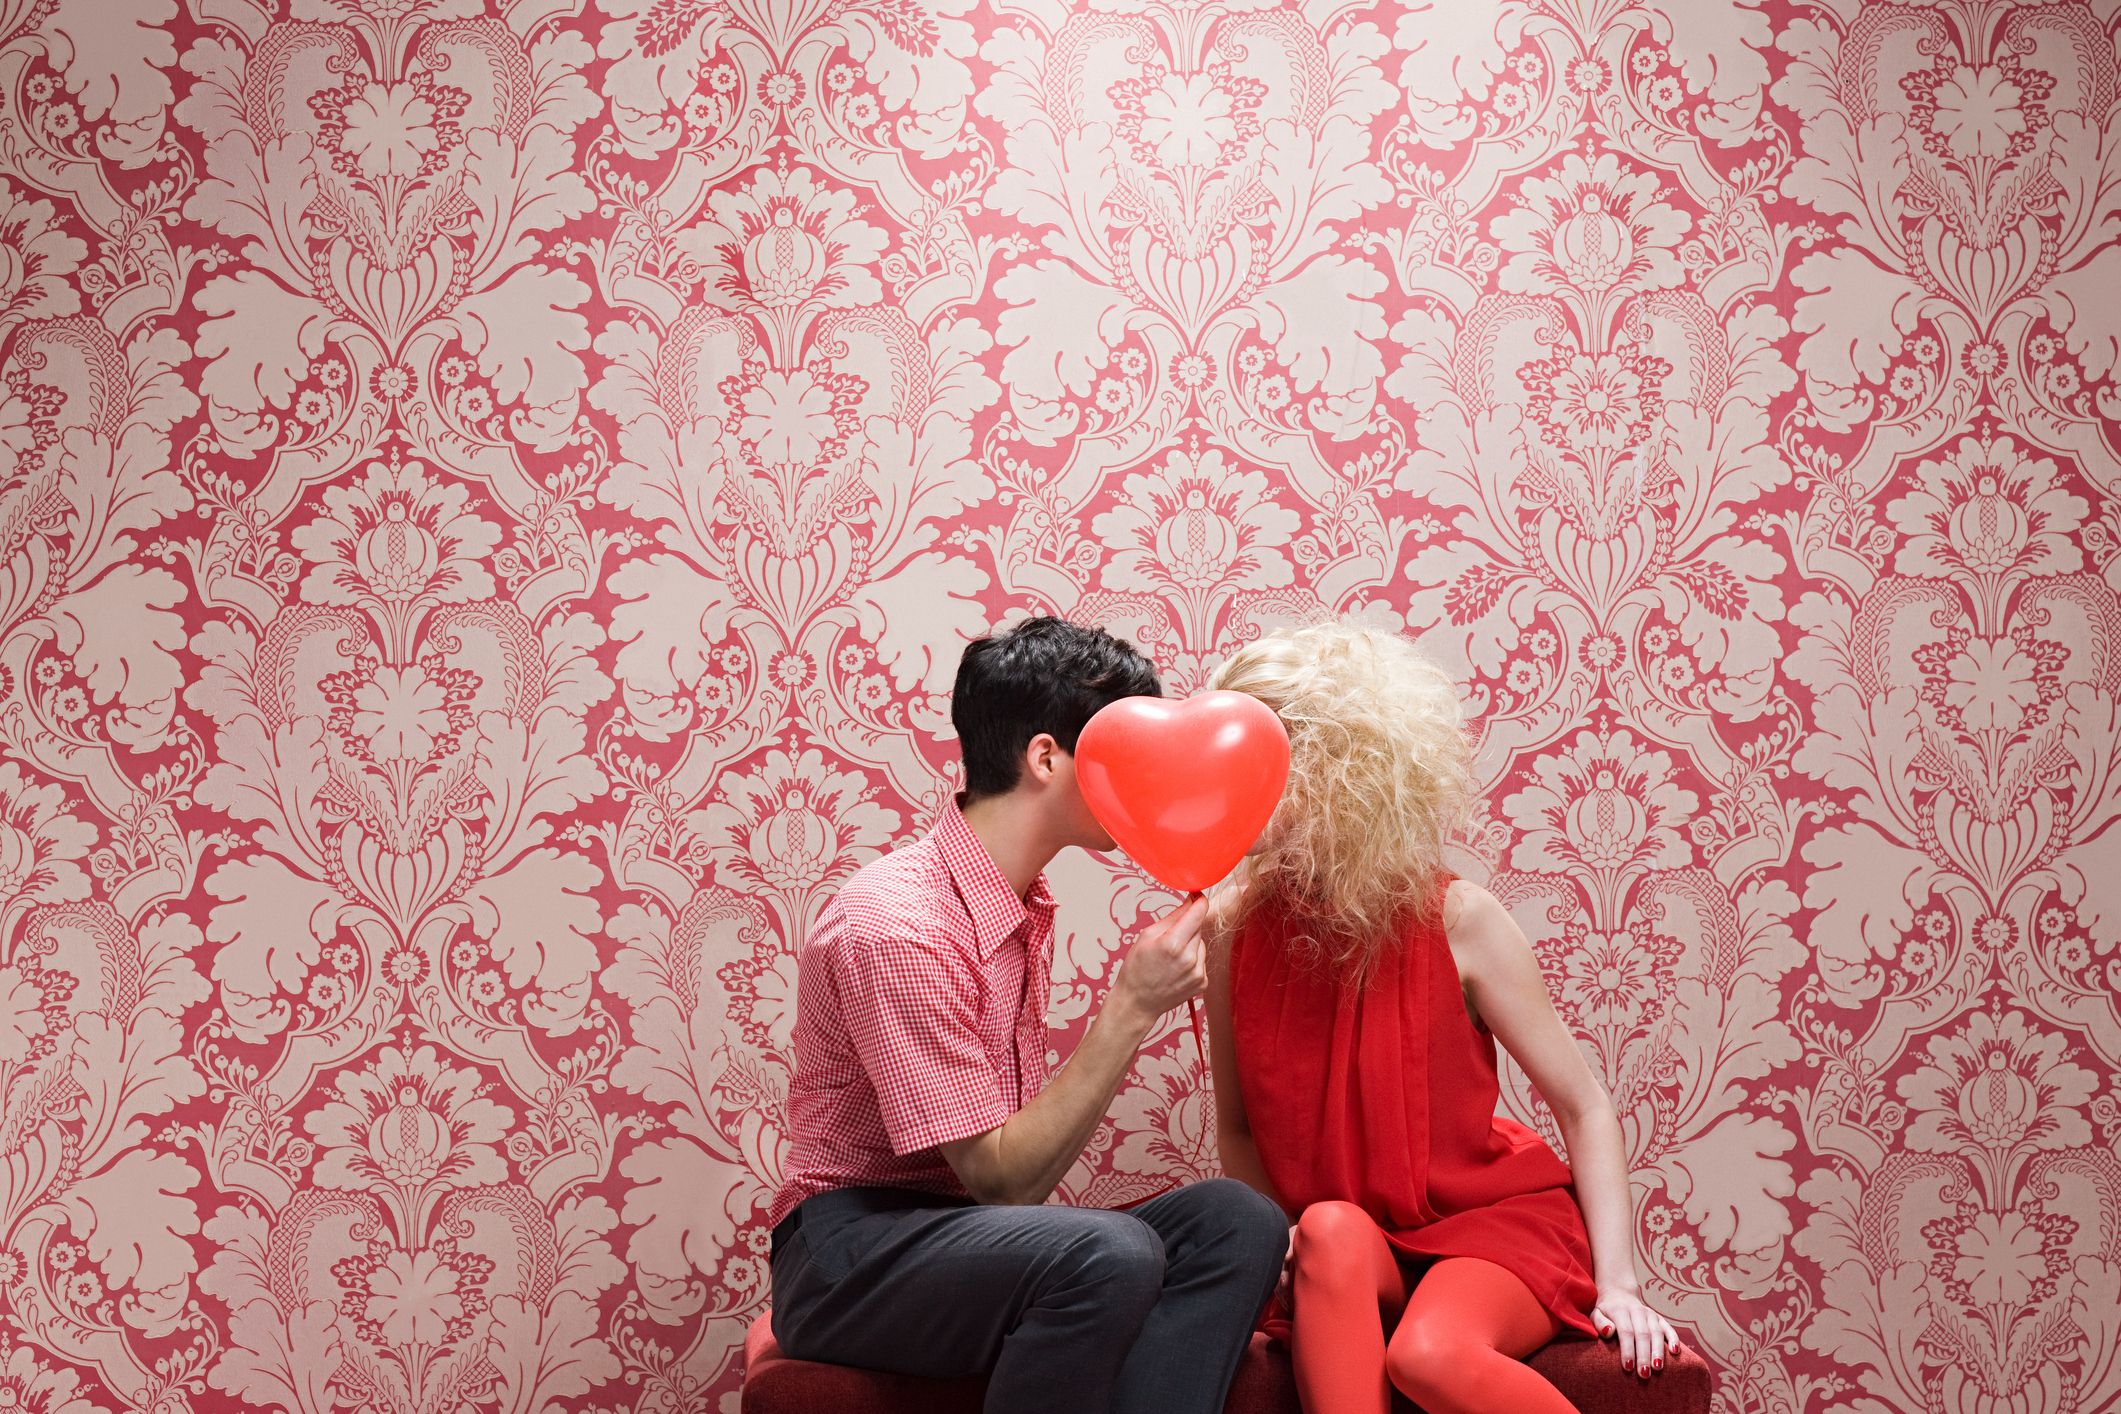 50 Cheap (or Free!) Date Ideas Valentine's Day